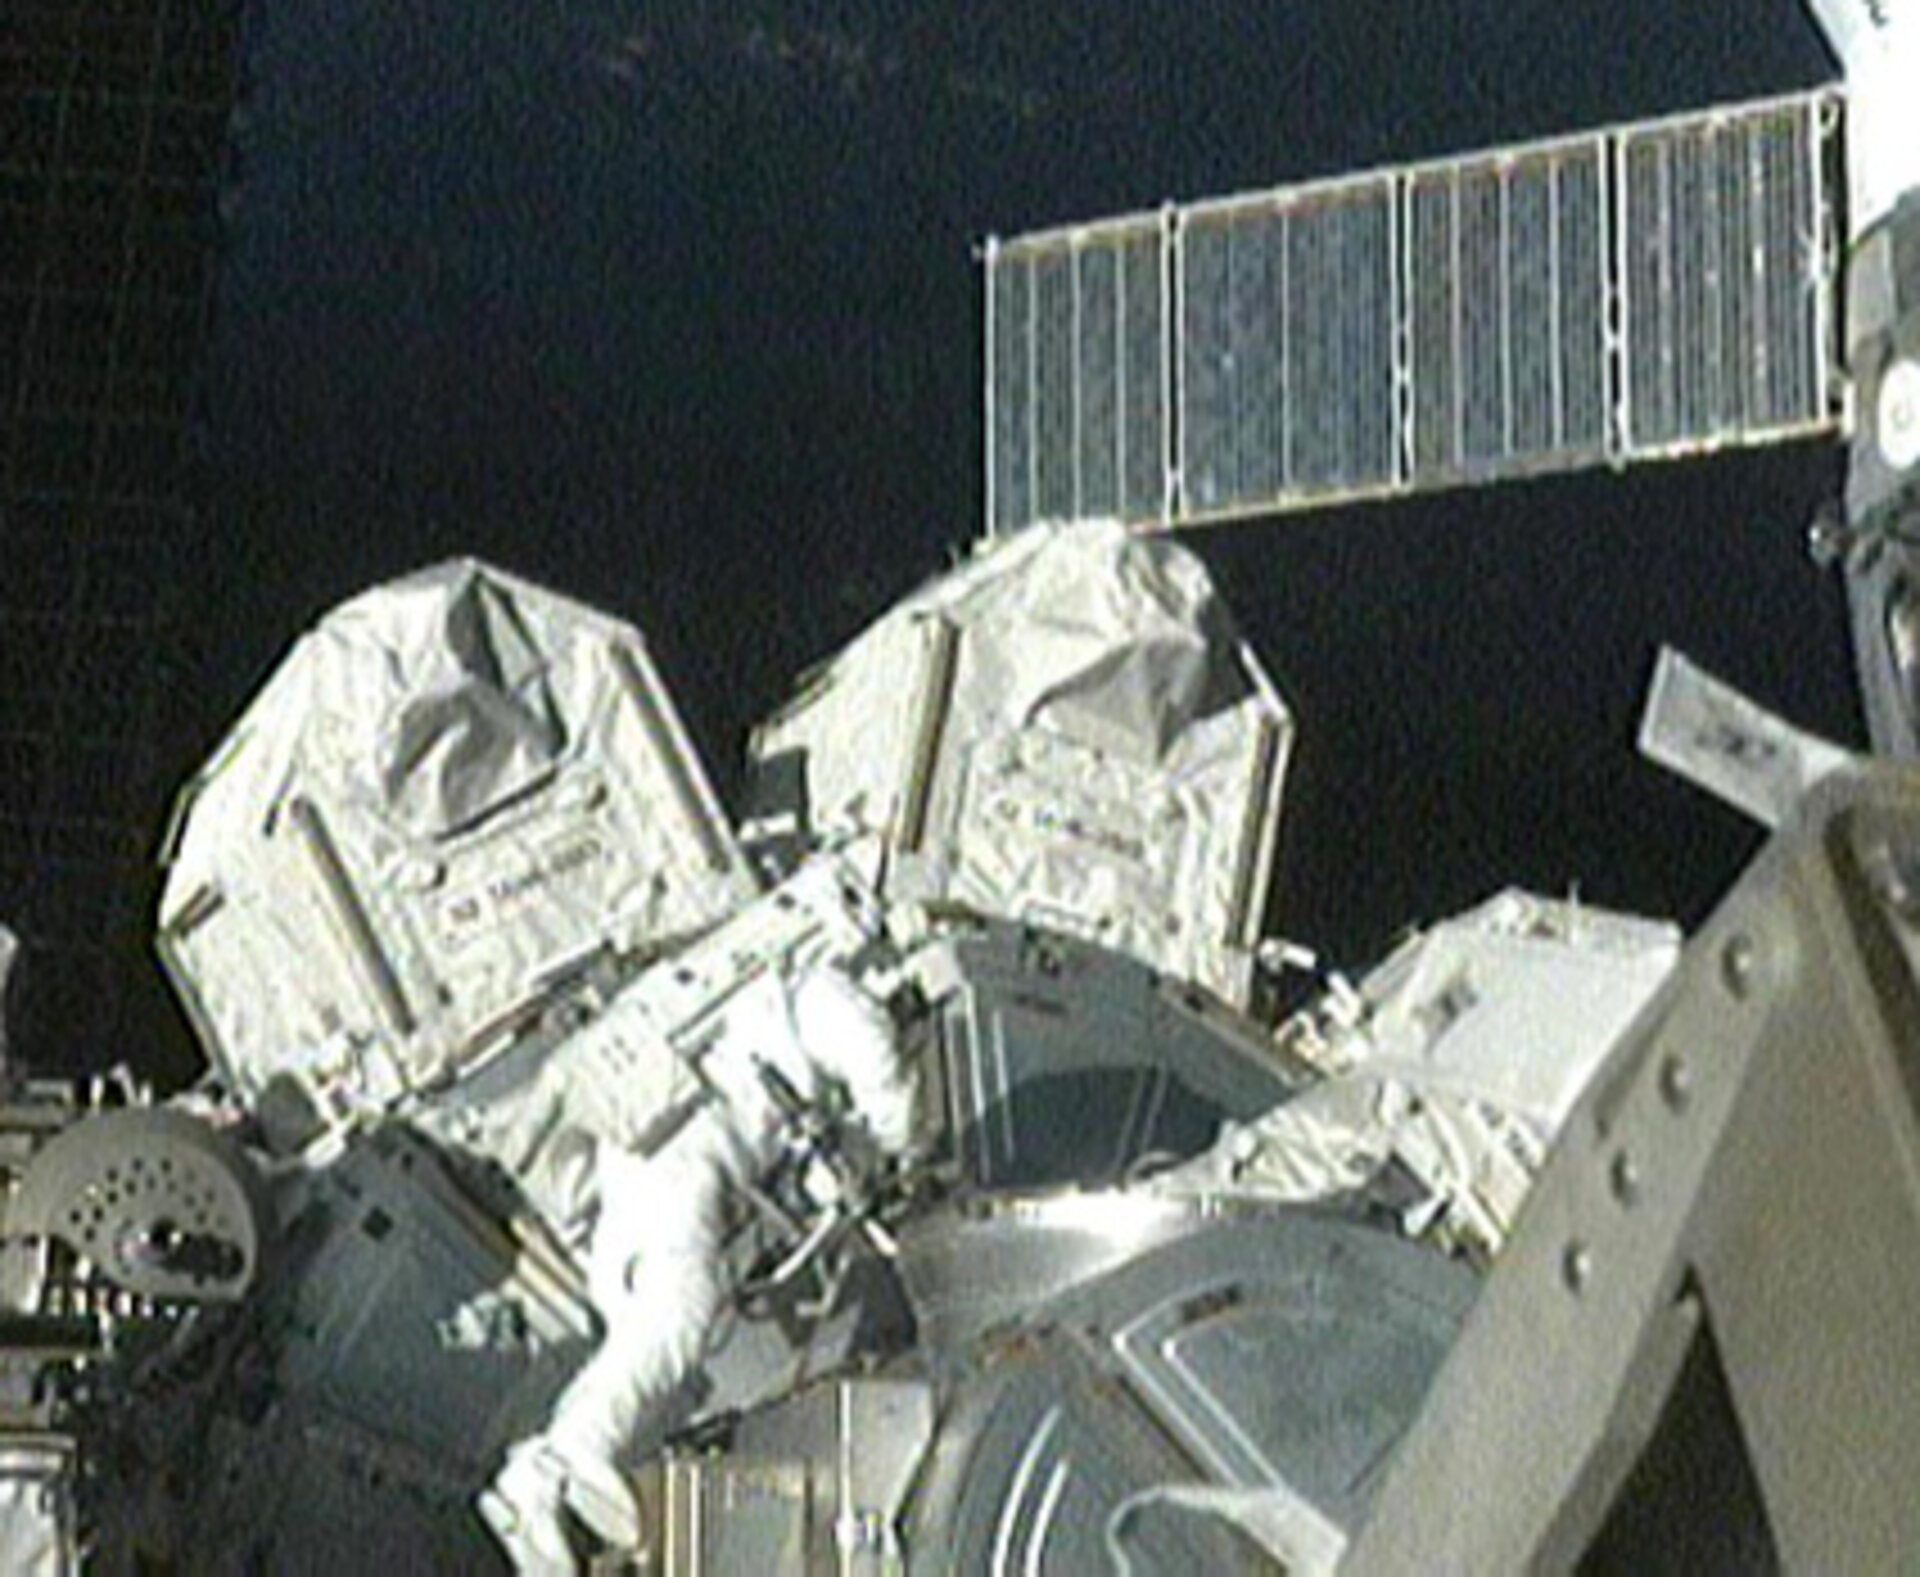 Fuglesang exits Quest Airlock at start of the third STS-128 spacewalk